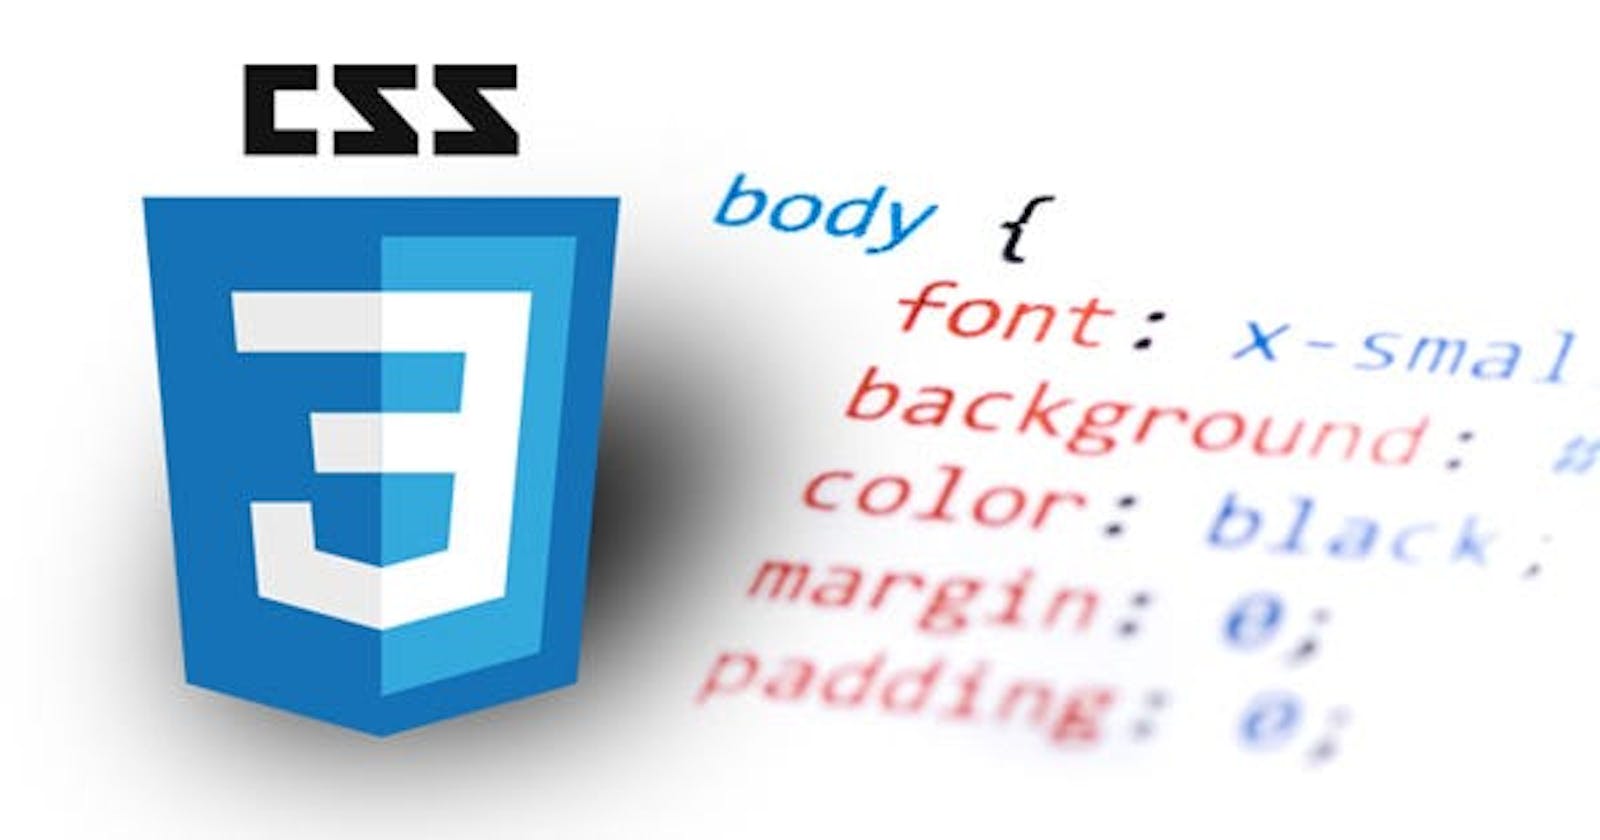 Level up your CSS skills